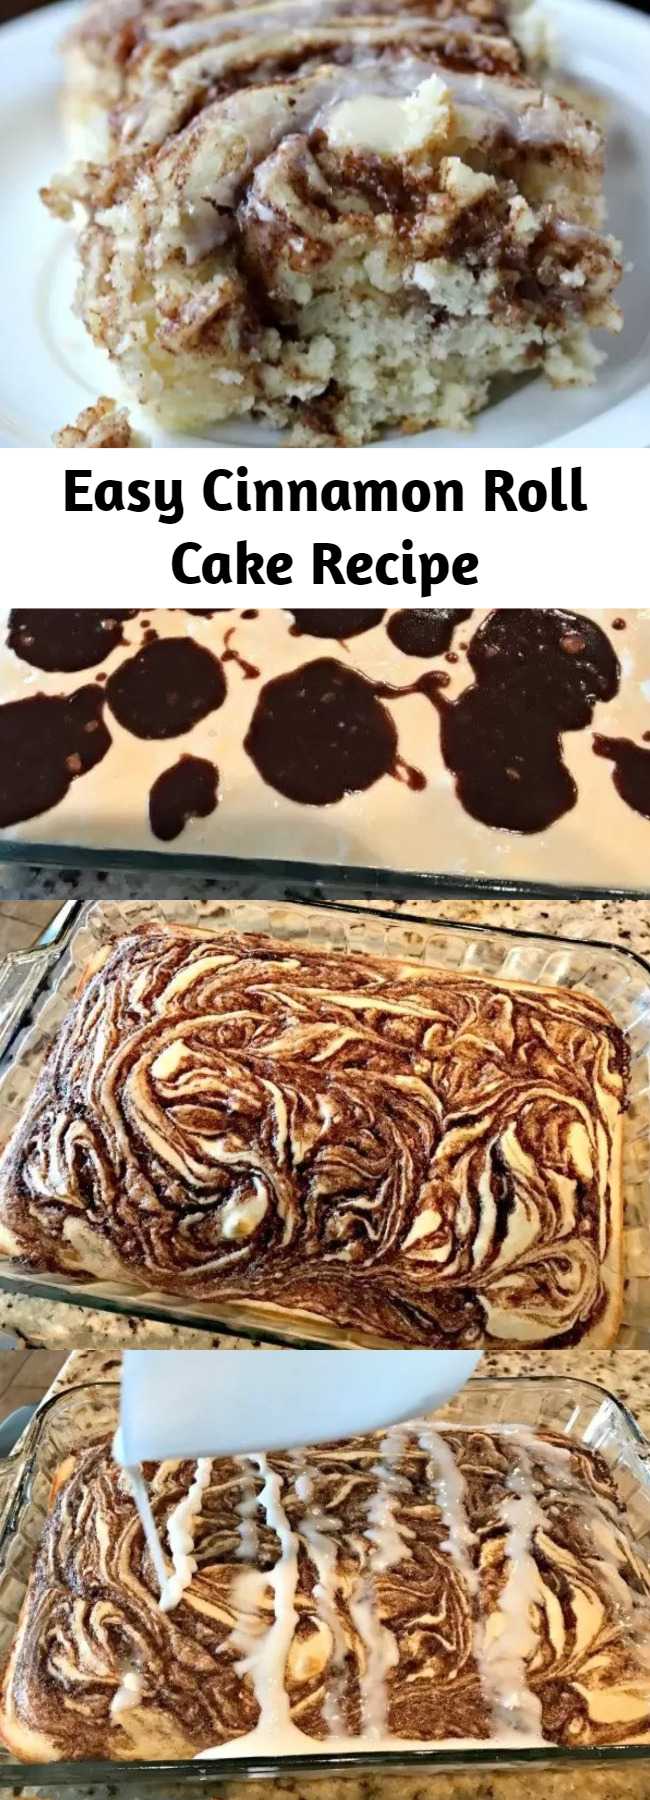 Easy Cinnamon Roll Cake Recipe - Here is a fun twist on a coffee cake recipe. This easy cinnamon roll cake recipe is the best. Get the taste of homemade cinnamon rolls without all the work. #cake #recipes #breakfastrecipes #easyrecipes